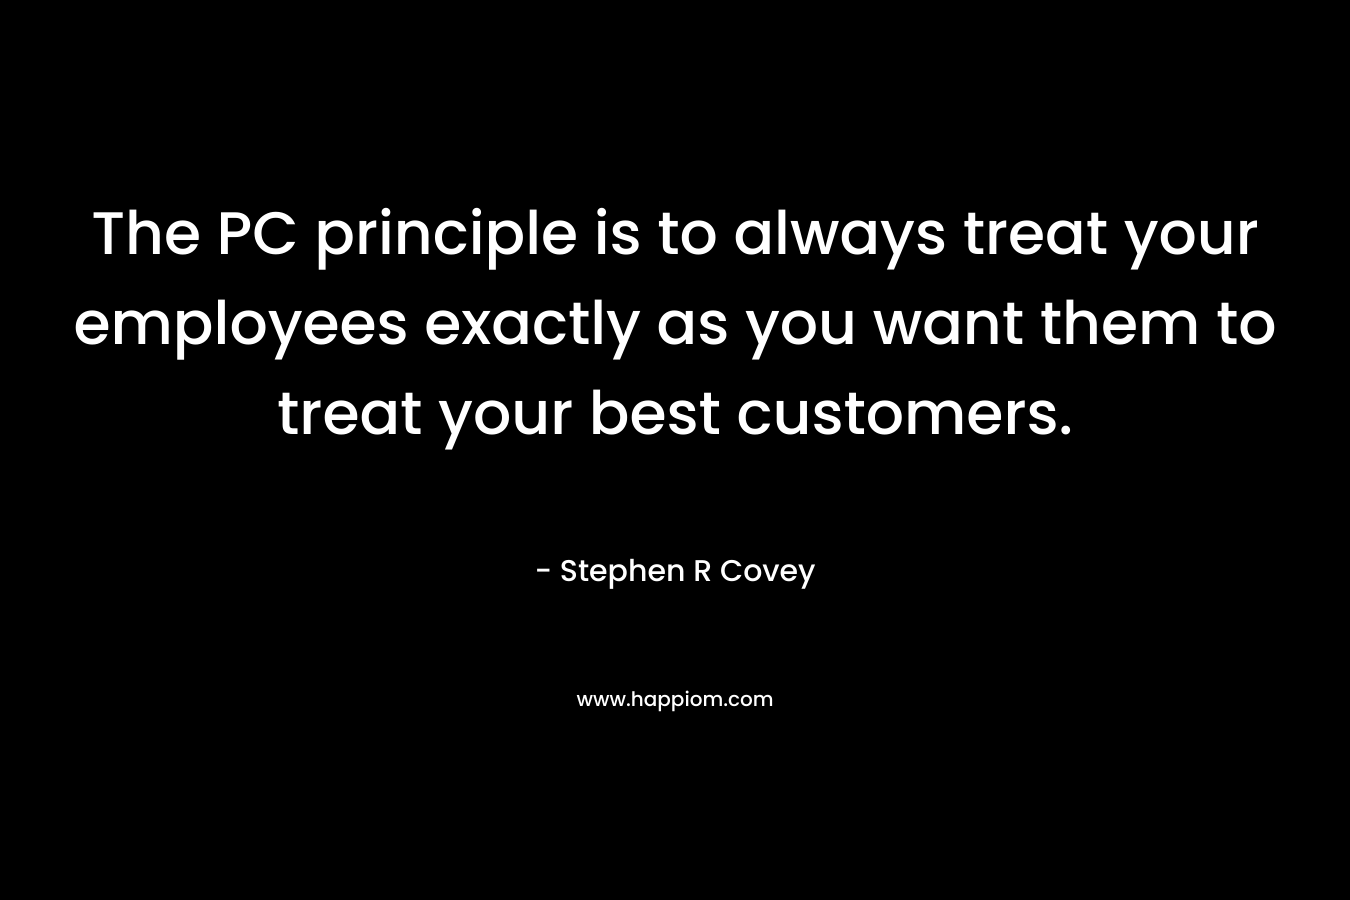 The PC principle is to always treat your employees exactly as you want them to treat your best customers. – Stephen R Covey